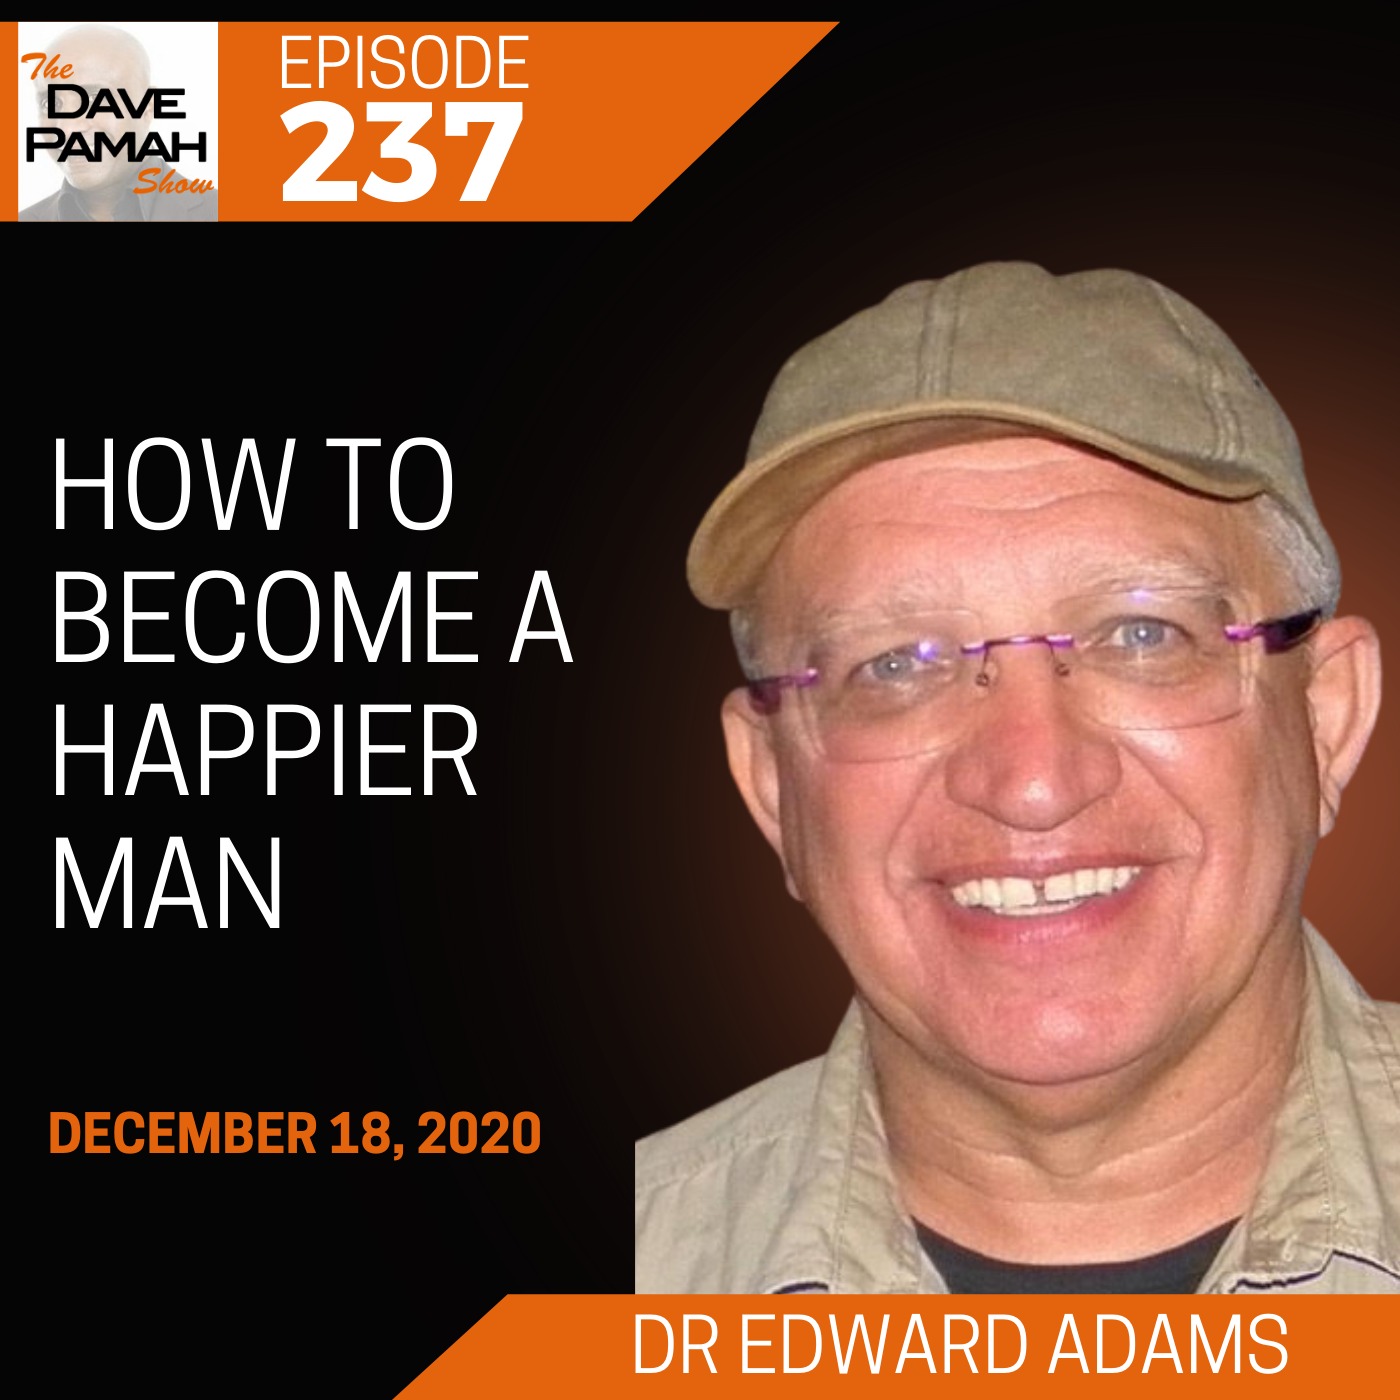 How to Become a Happier Man with Dr Edward Adams Image